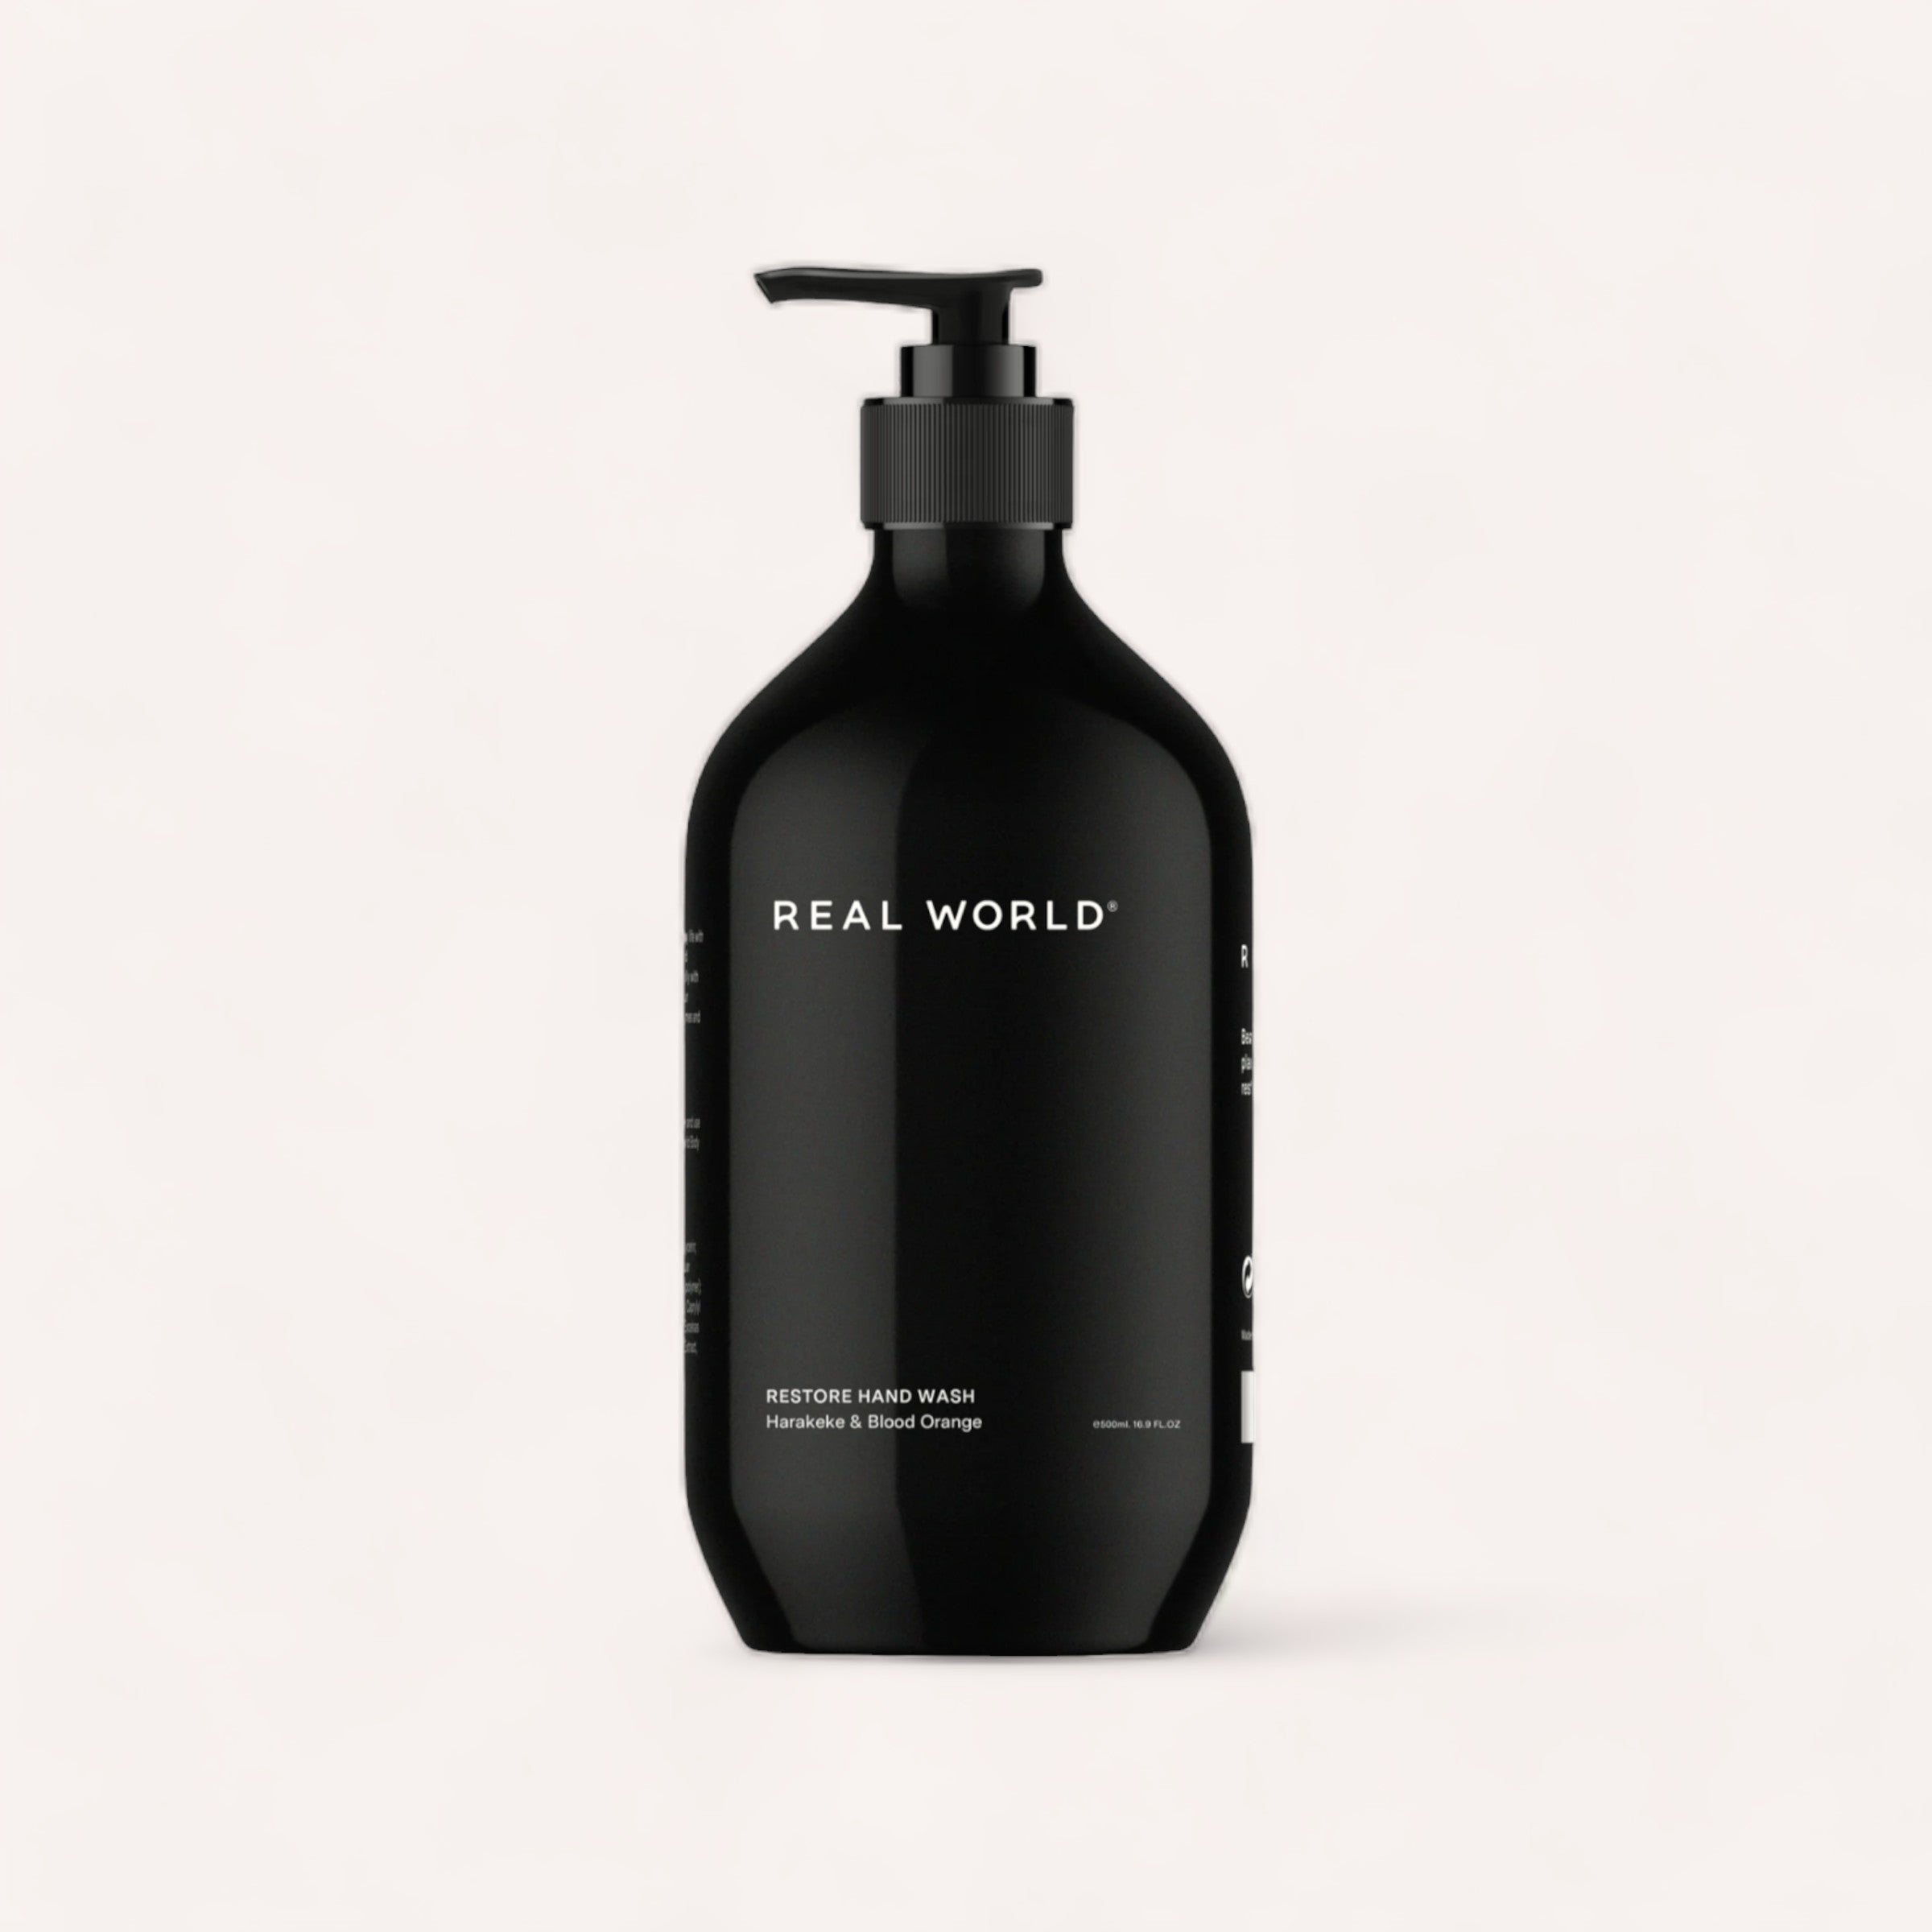 A sleek black bottle of Hand Wash - Harakeke & Blood Orange by Real World, featuring a pump dispenser against a clean, white background.